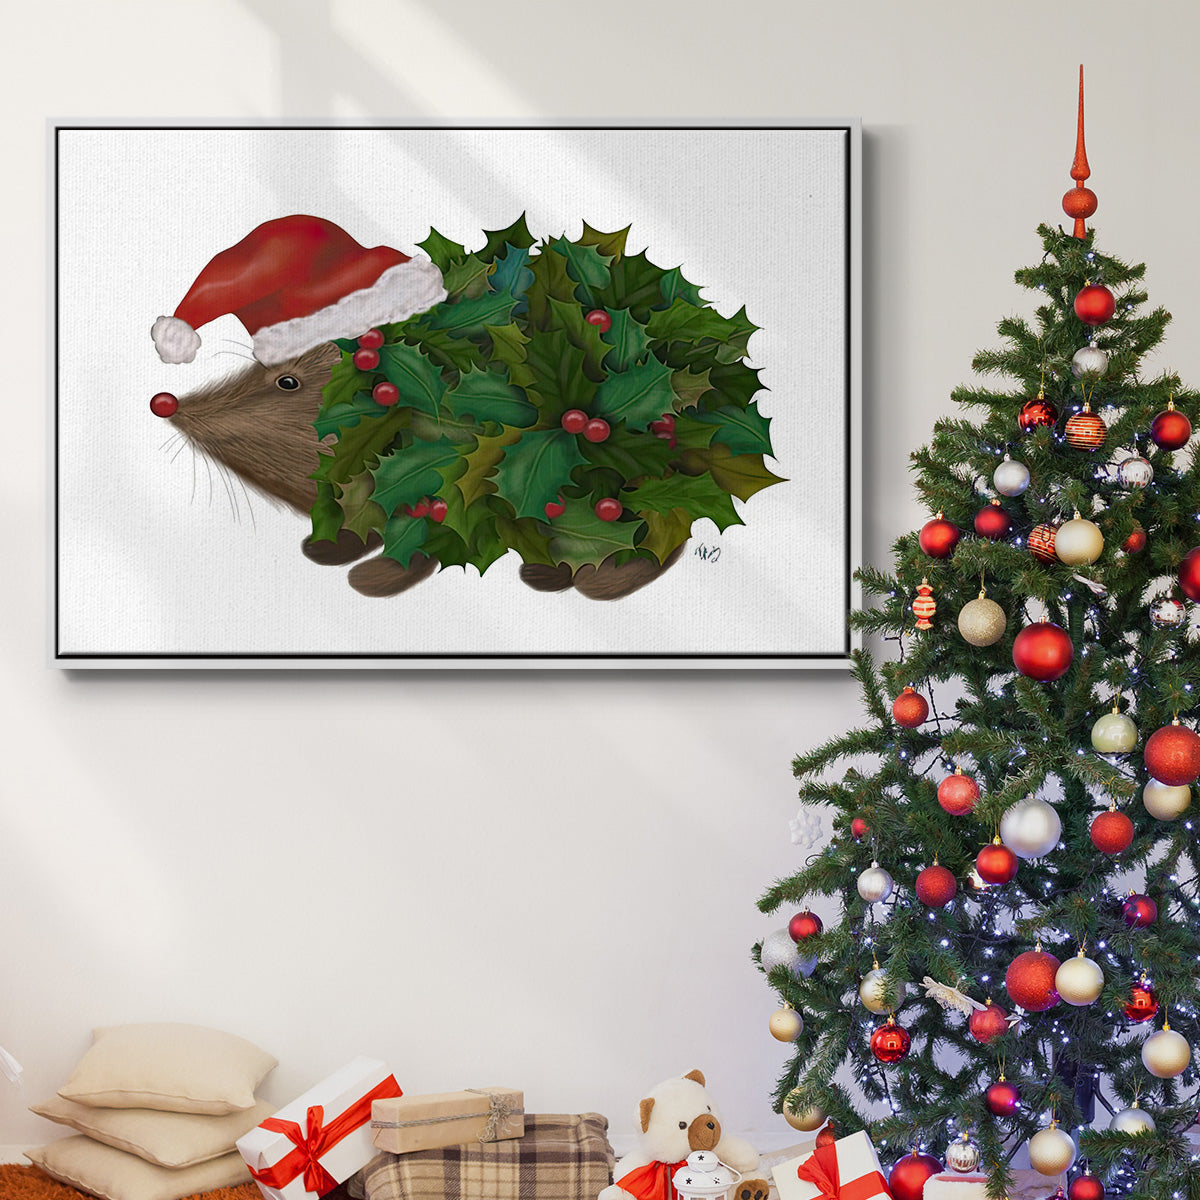 Christmas Holly Hedgehog - Framed Gallery Wrapped Canvas in Floating Frame